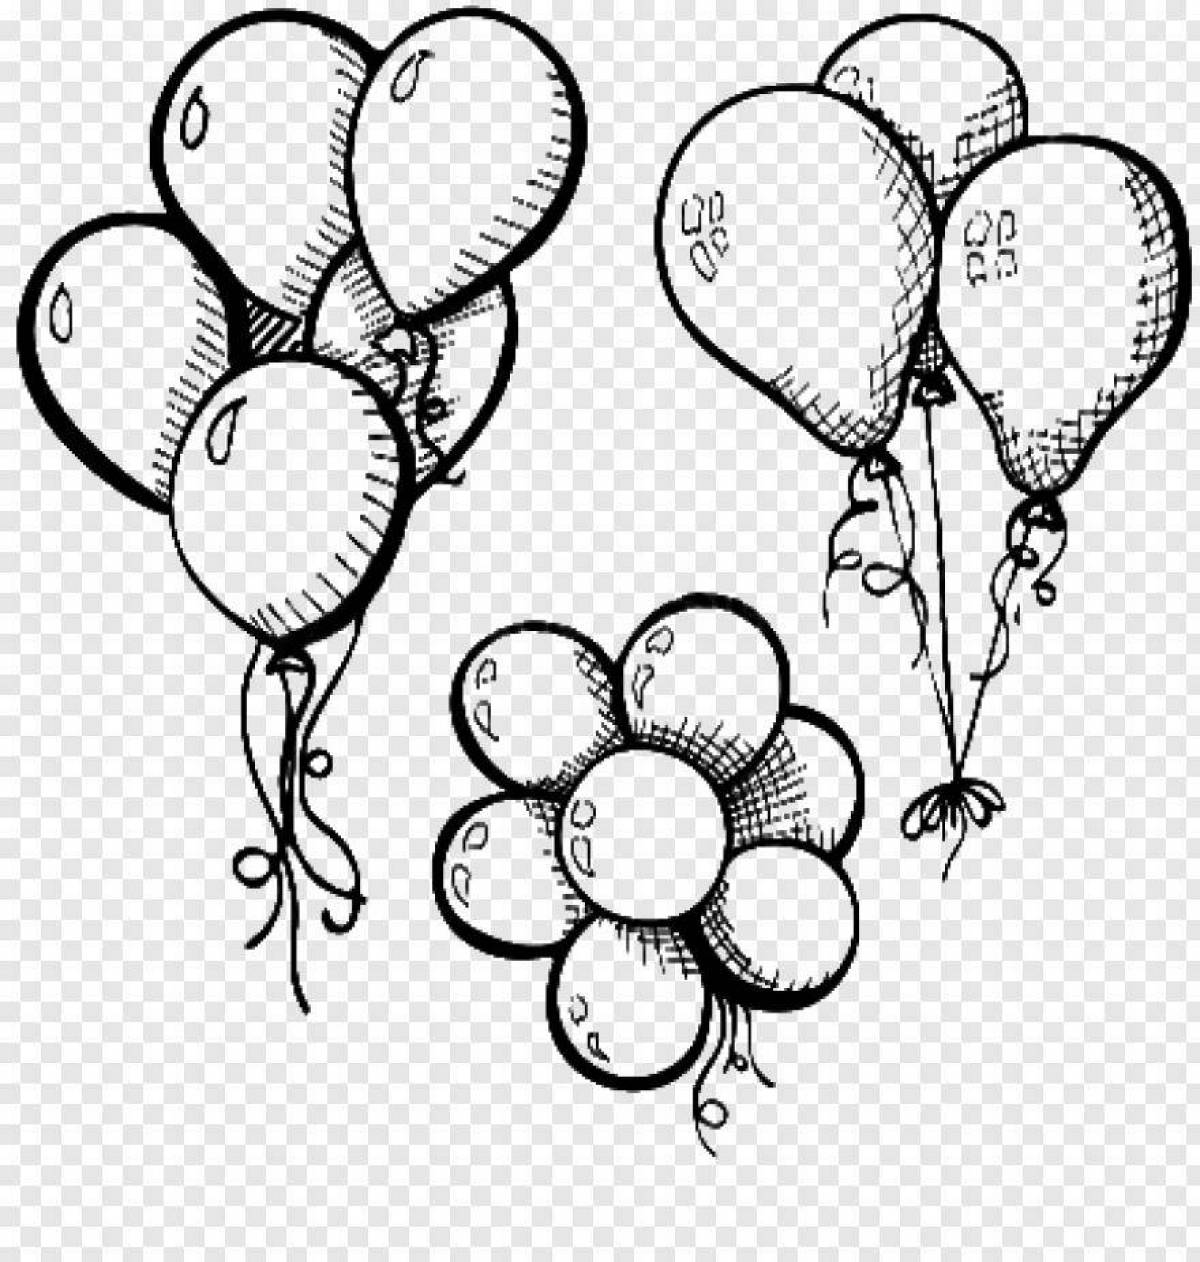 Coloring book sparkling bunch of balloons